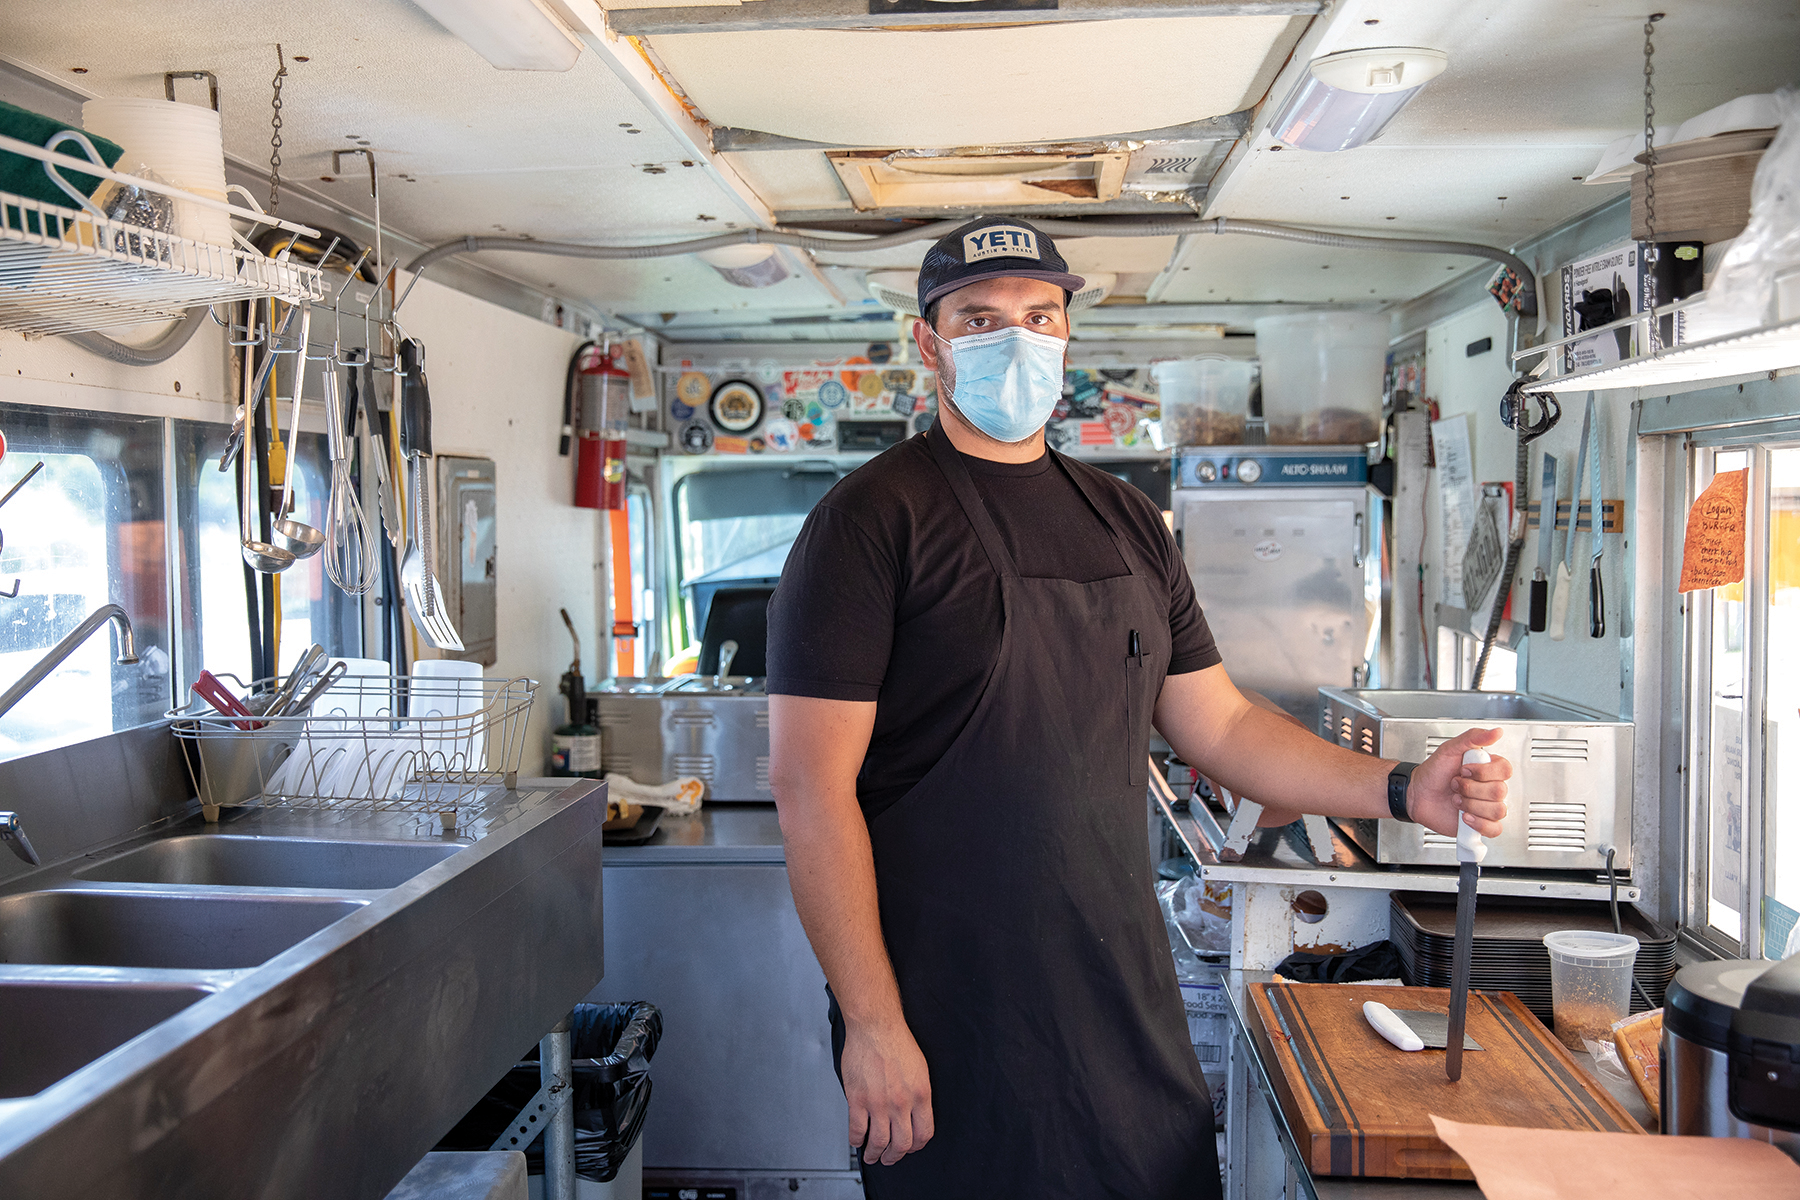 Evan LeRoy, of LeRoy & Lewis, was in the midst of negotiating a loan for a brick-and-mortar location for his barbecue food truck when the pandemic hit. He secured a PPP loan and retained all eight of his employees.